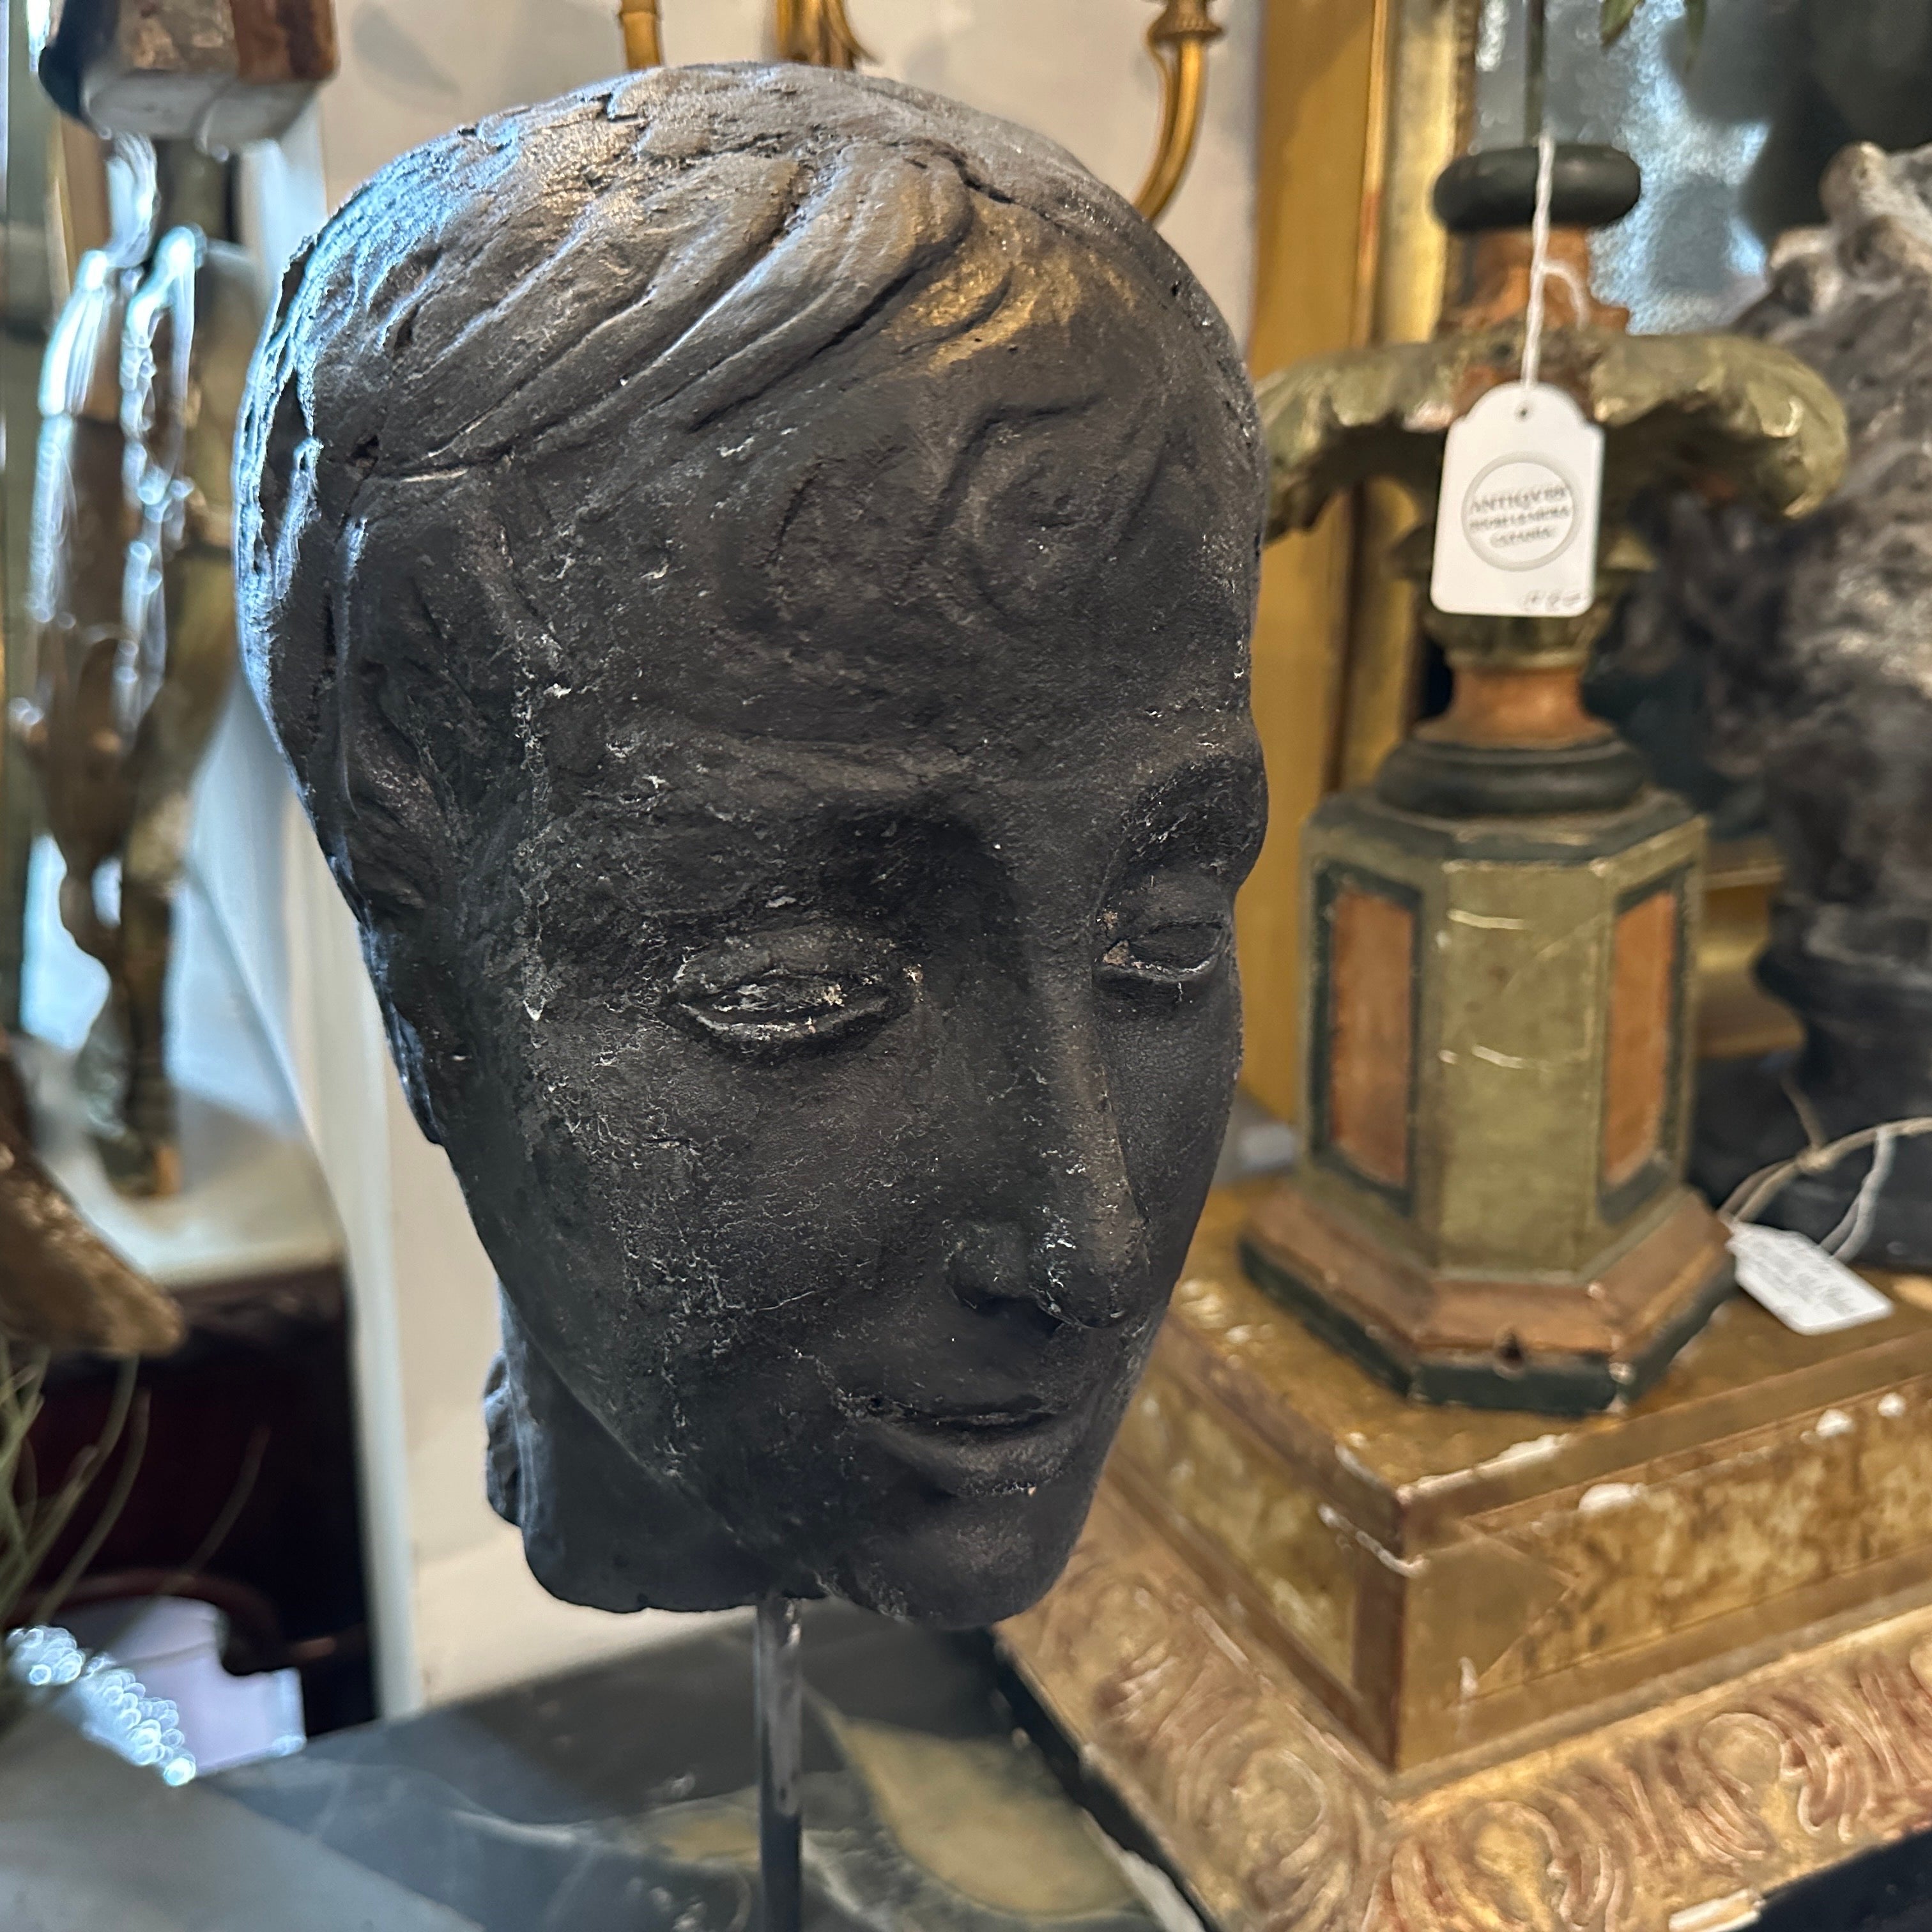 A black painted clay head handcrafted in Sicily in the late 19th century, the head it's in original condition and shows signs of aging, which contribute to their charm and authenticity, it has been mounted in an iron base that plays it down and